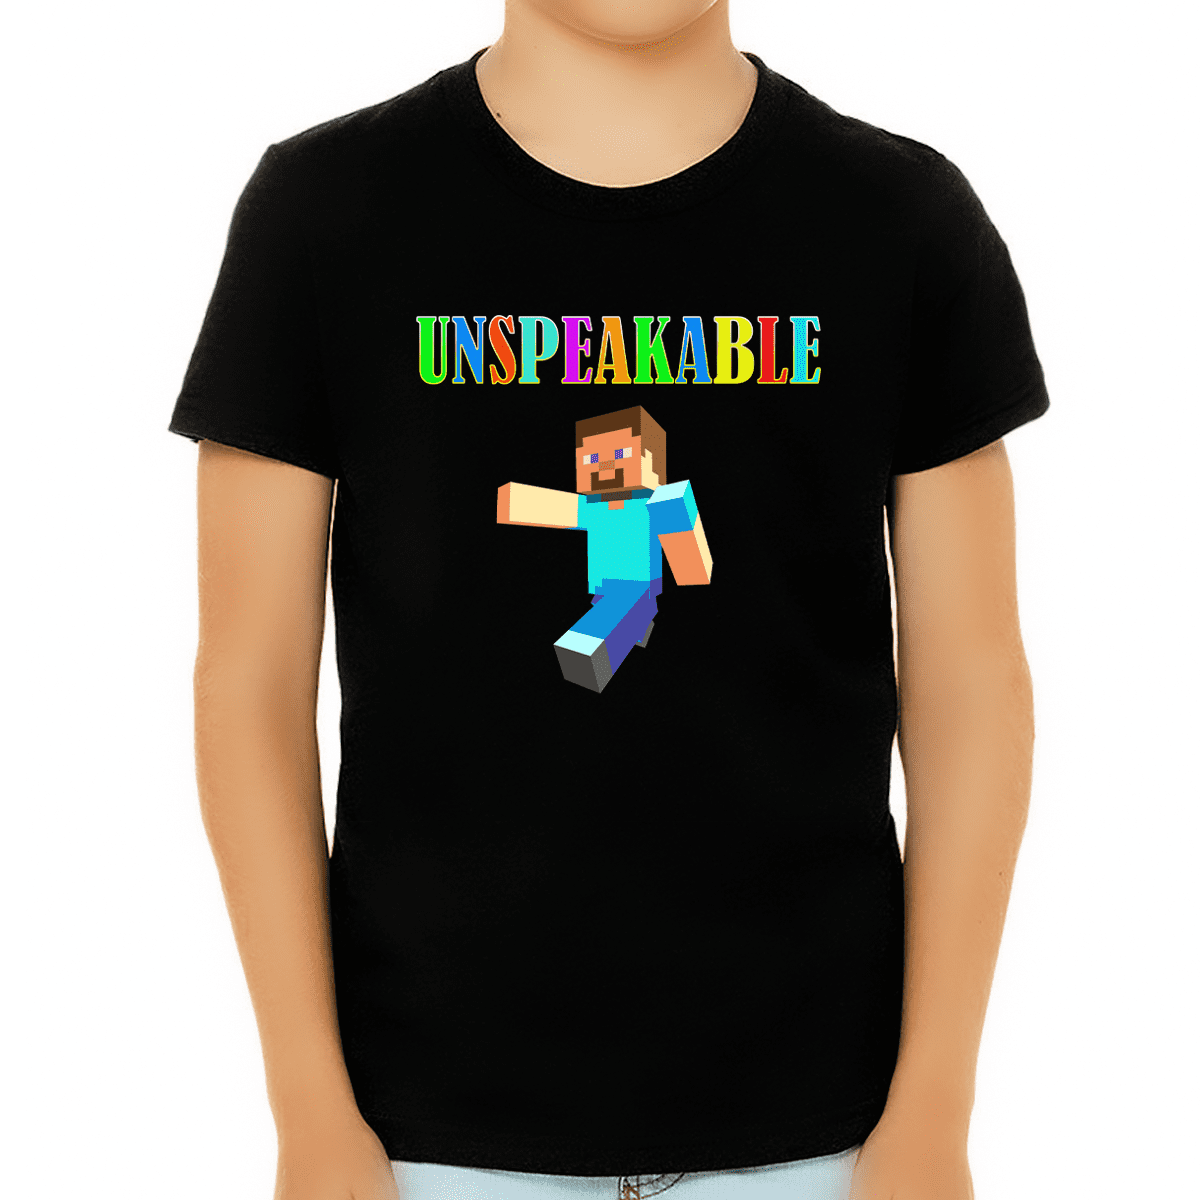 Fire Fit Designs - UNSPEAKABLE Shirt - Unspeakable Merch for Boys, Kids,  Youth &amp; Teens - Minecraft Shirt for Kids - Walmart.com - Walmart.com